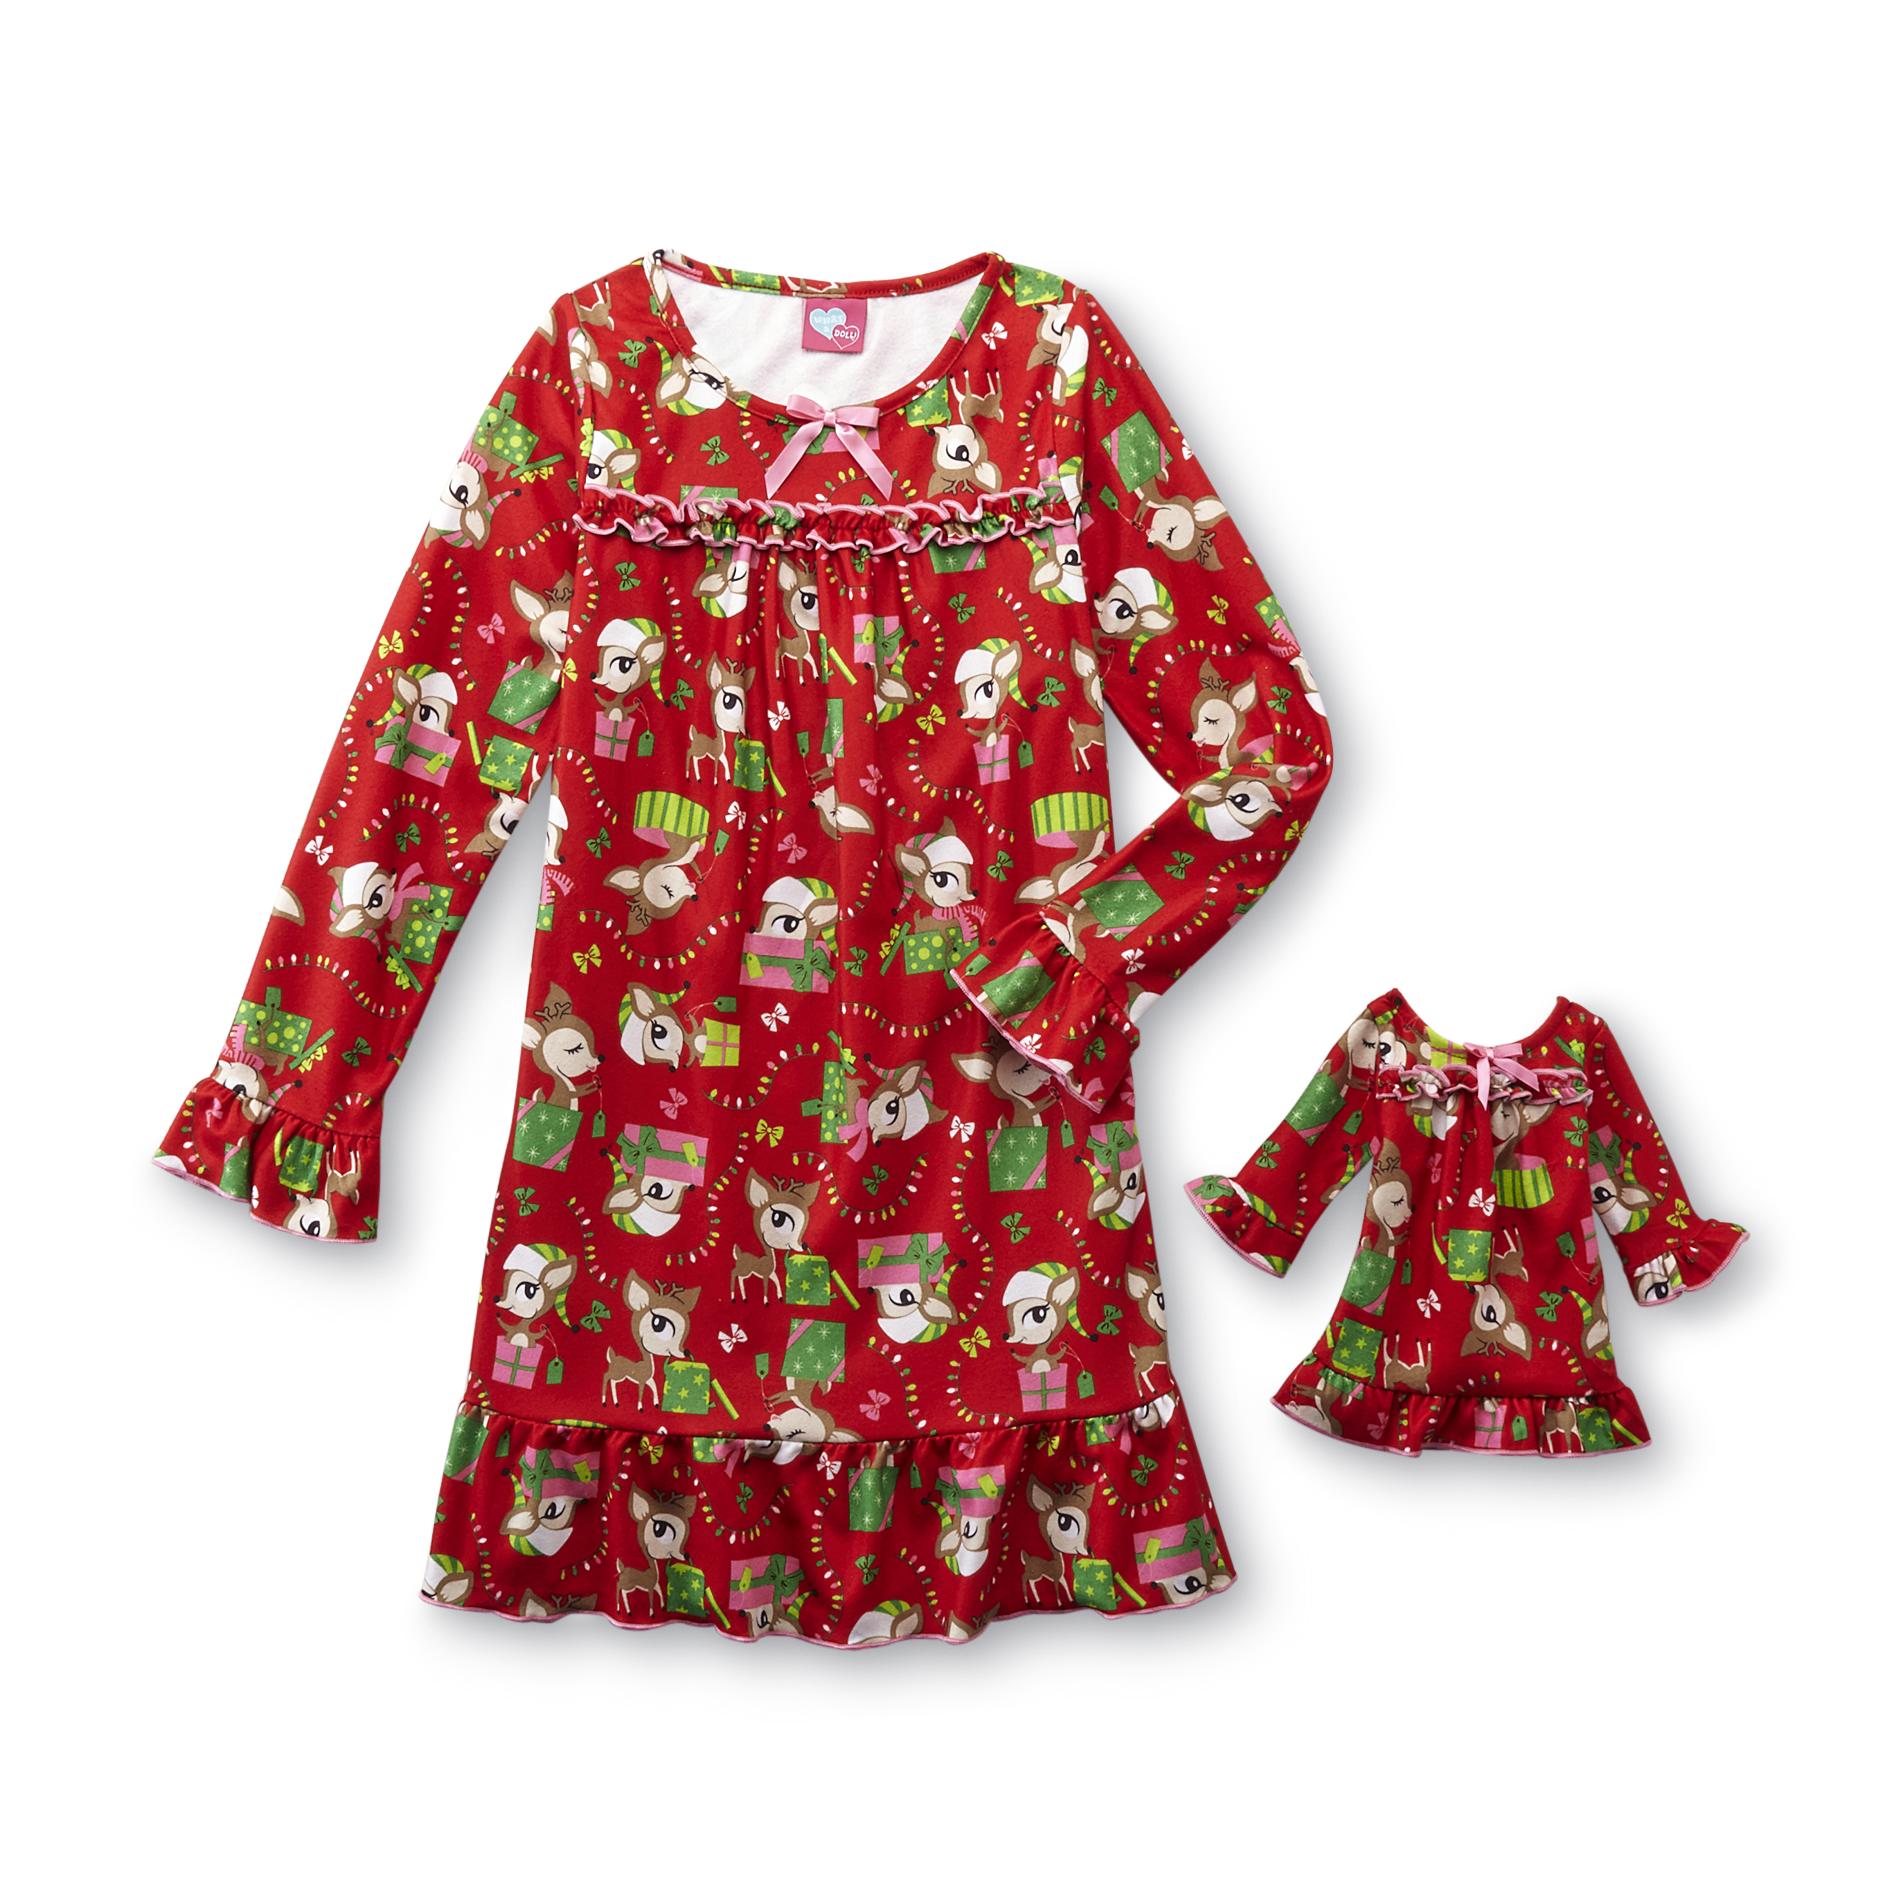 What A Doll Girl's Christmas Nightgown & Doll Outfit - Reindeer